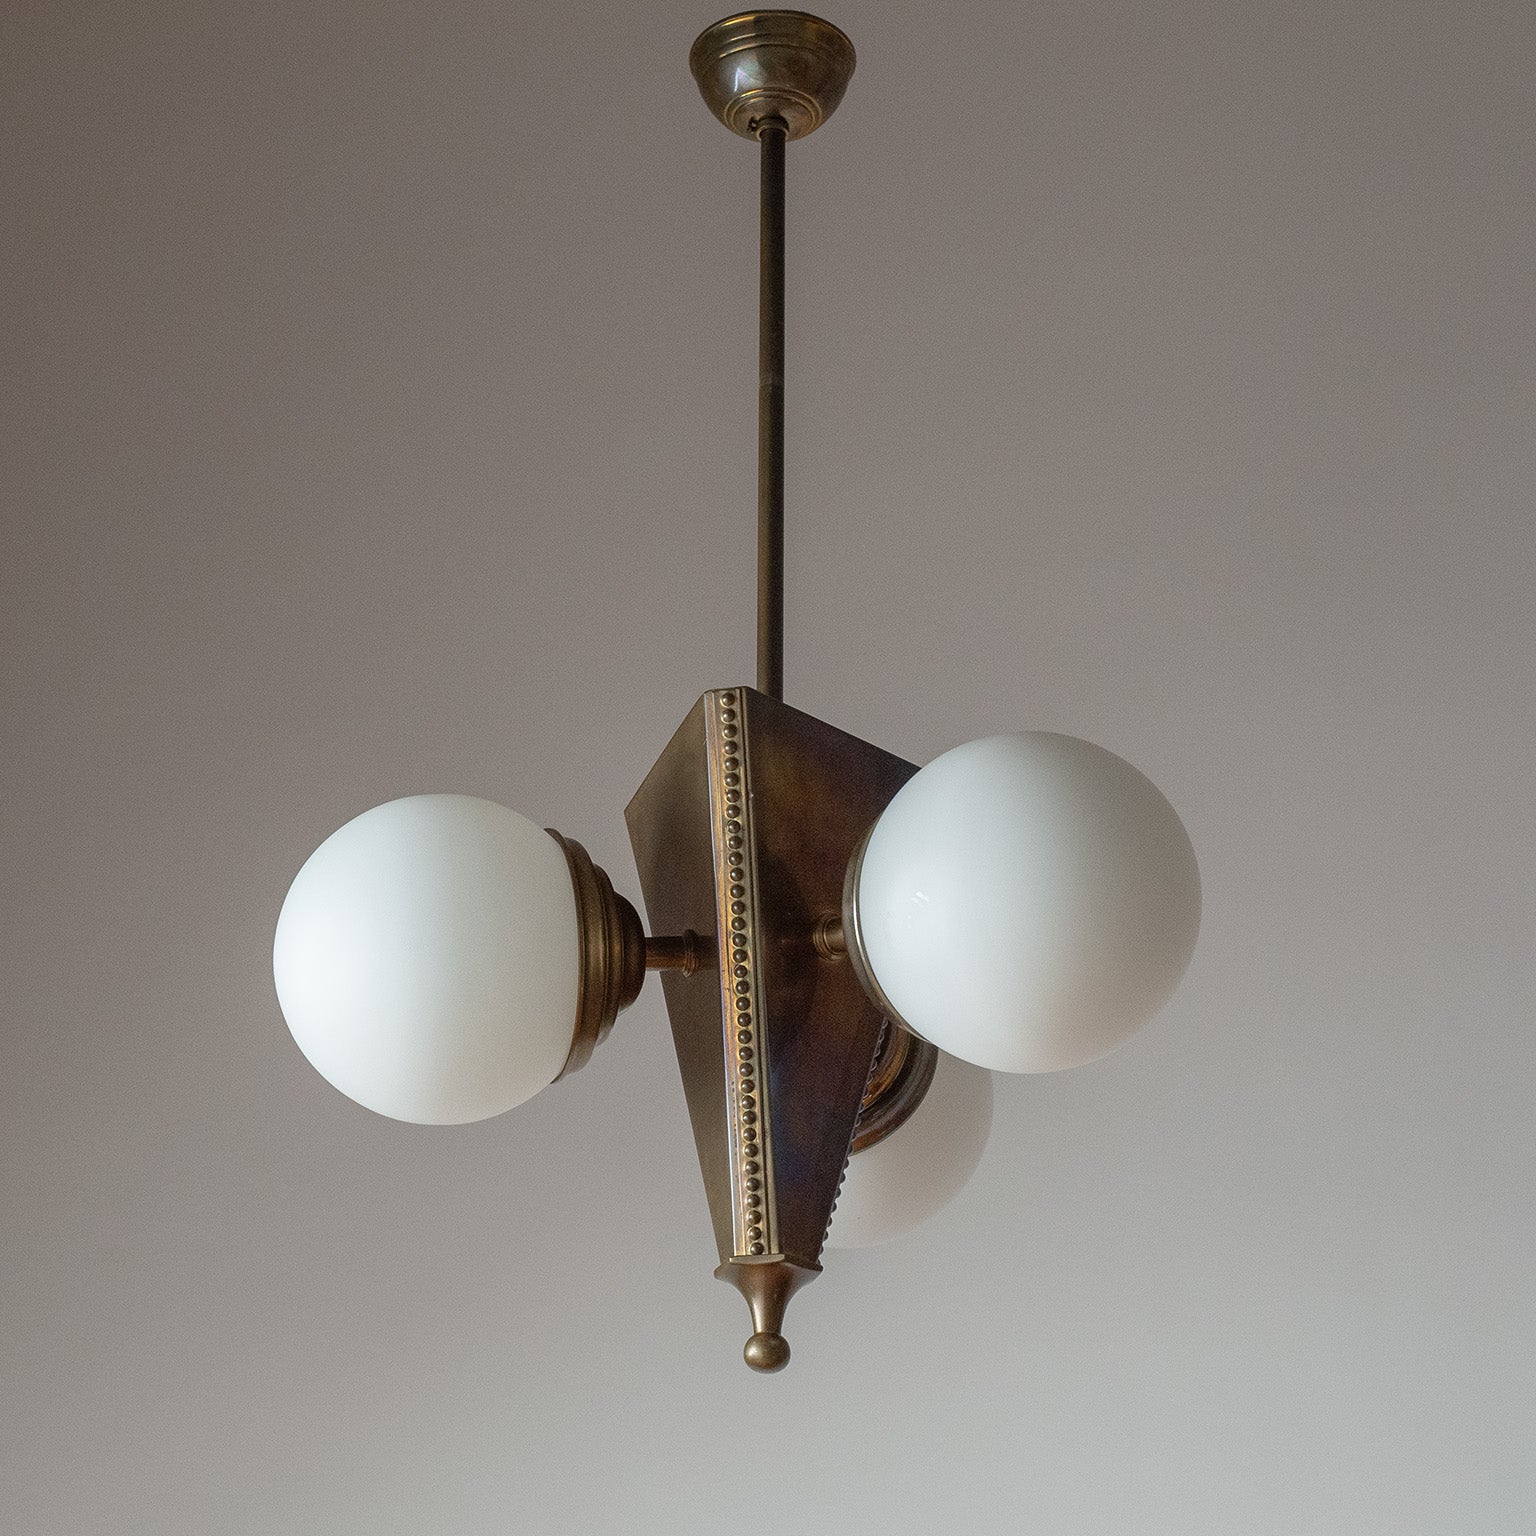 Fine Austrian Art Deco or Jugendstil chandelier in brass with satin glass globes. Designed in the early 20th century, this is probably a re-edition from the 1970s. Large triangular centerpiece with three satin glass diffuser. Nicely detailed with